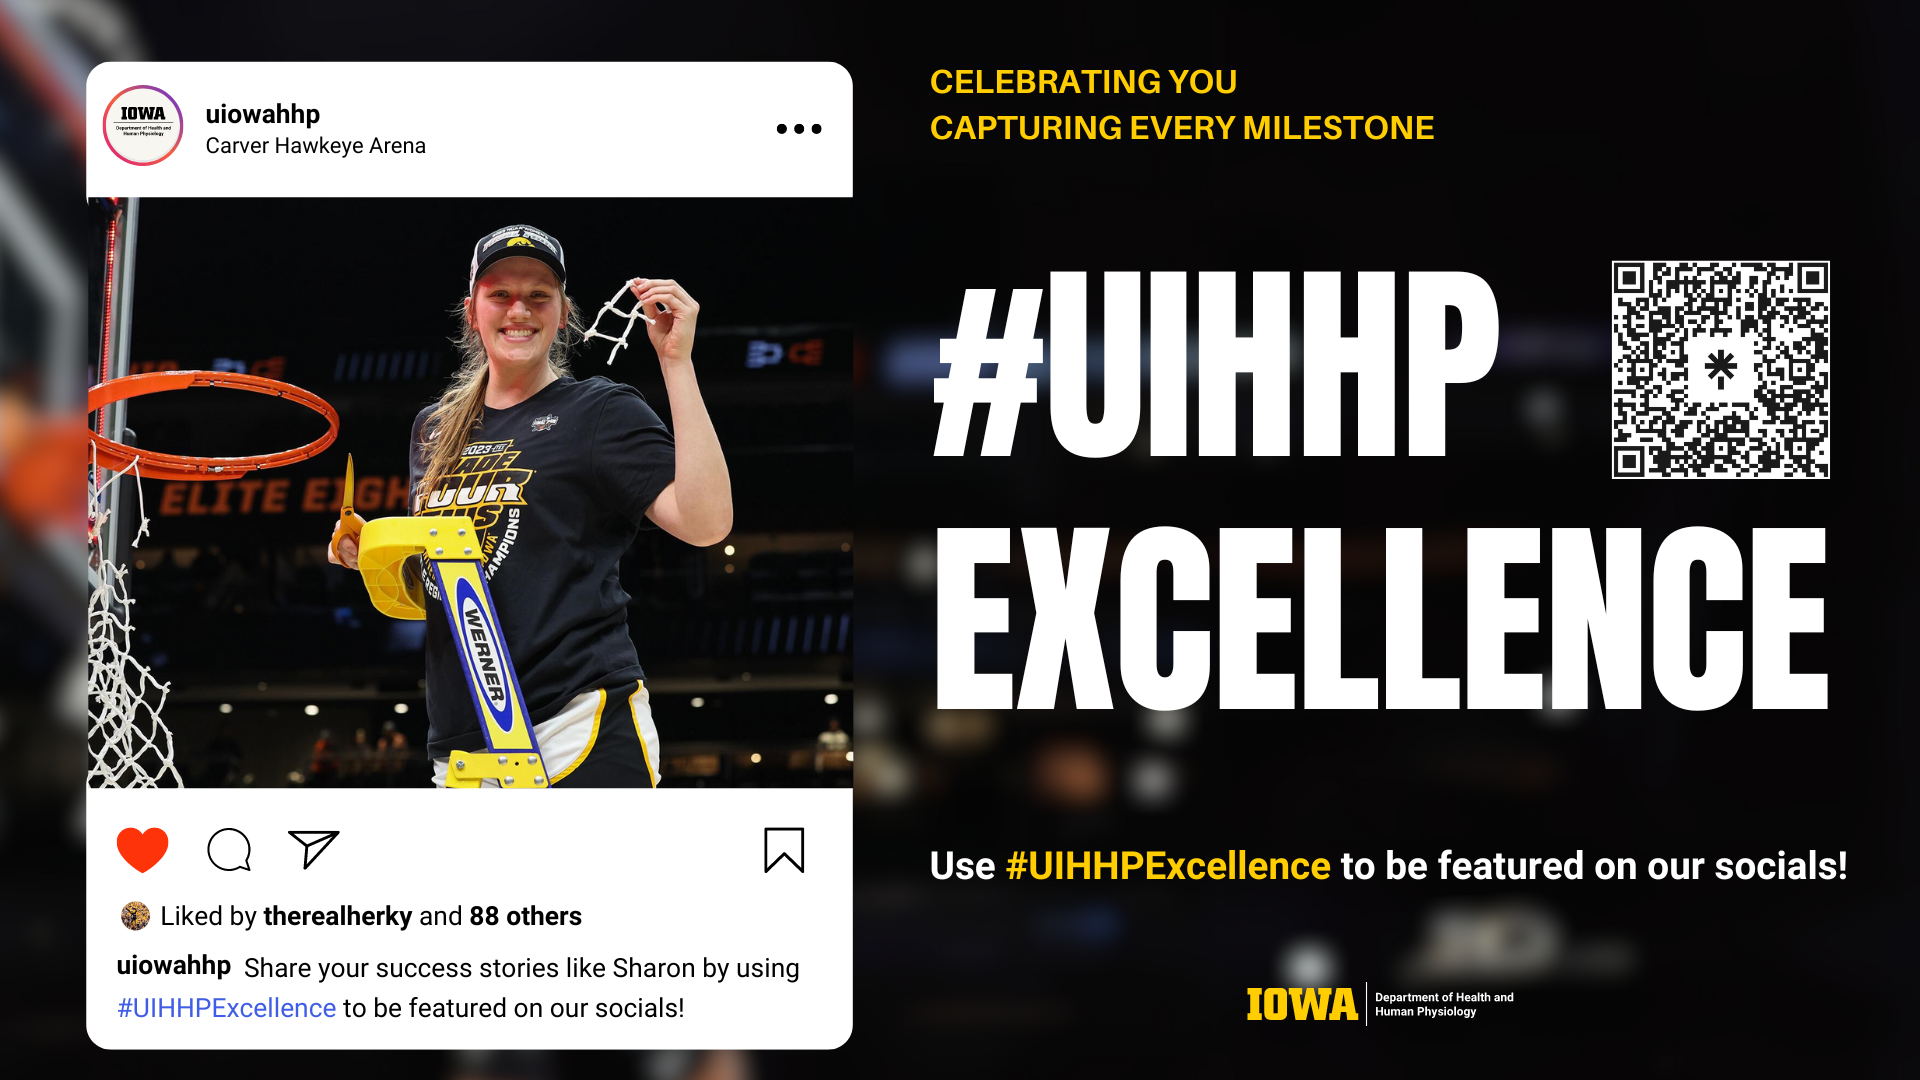 Celebrate academic acheivements by using #UIHHPExcellence to be featured on our socials